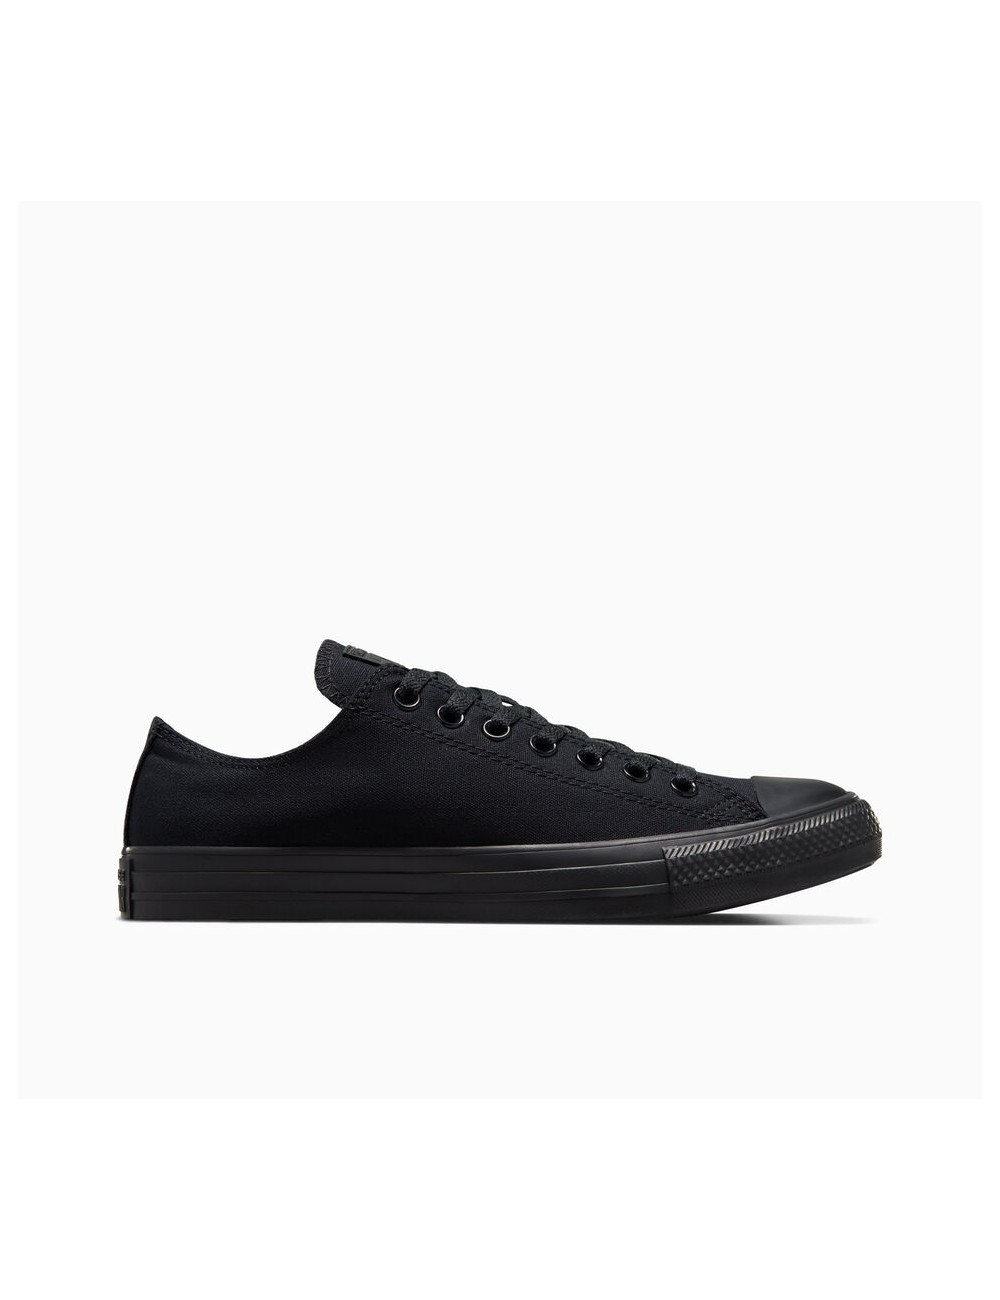 SNEAKERS CONVERSE CHUCK TAYLOR ALL STAR CLASSIC BLACK/BLACK